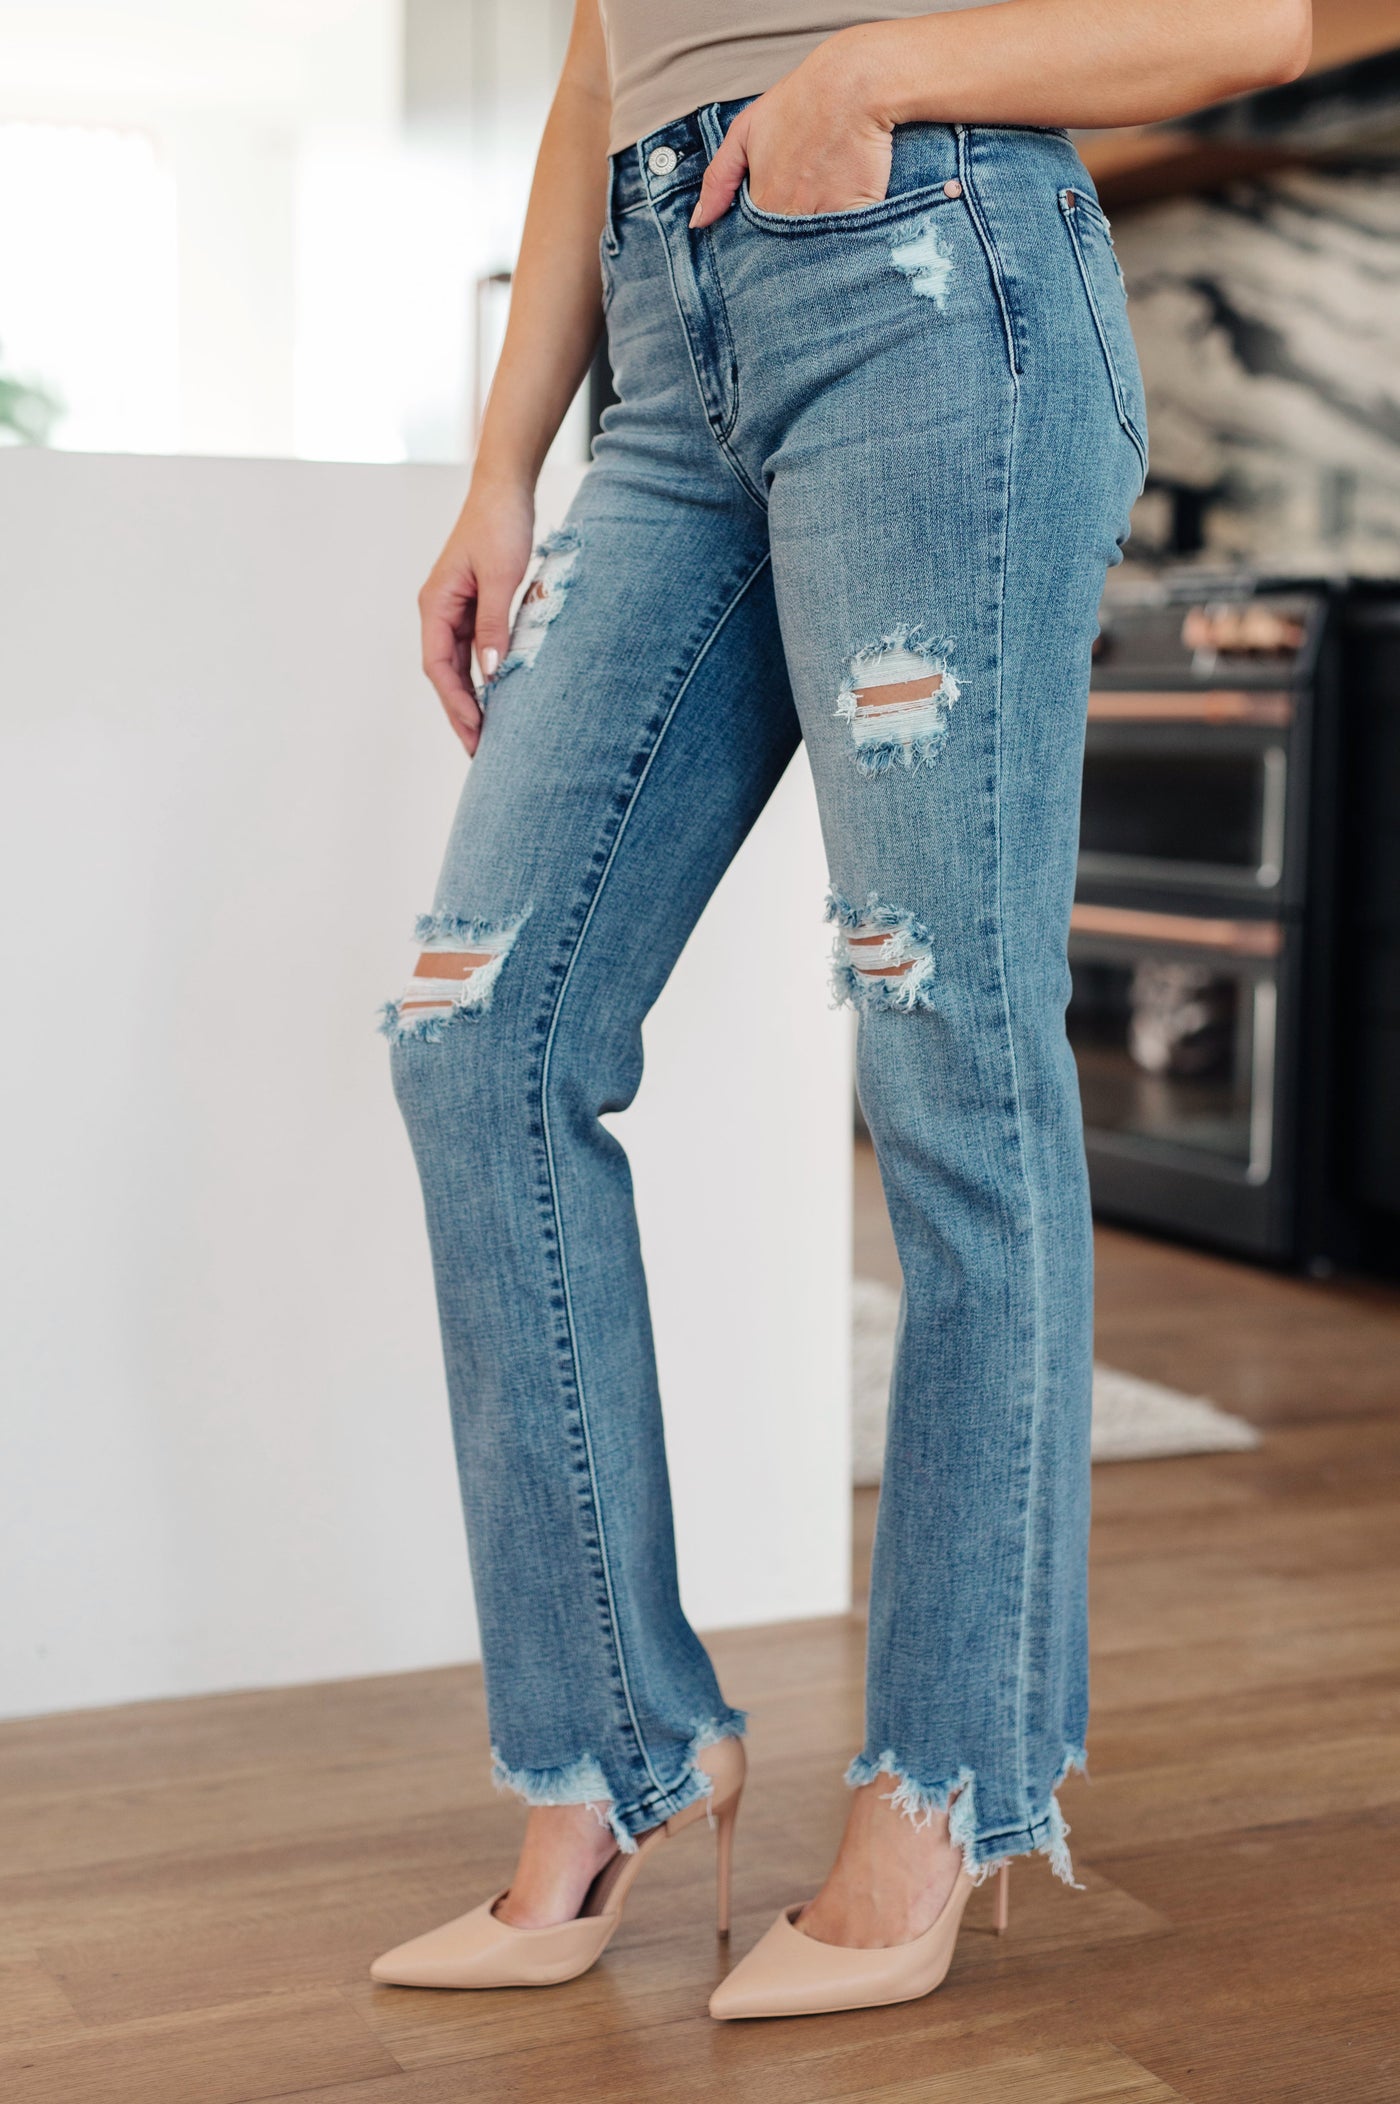 Judy Blue: Chi Town Mid Rise Destroyed Straight Jeans in Medium Wash